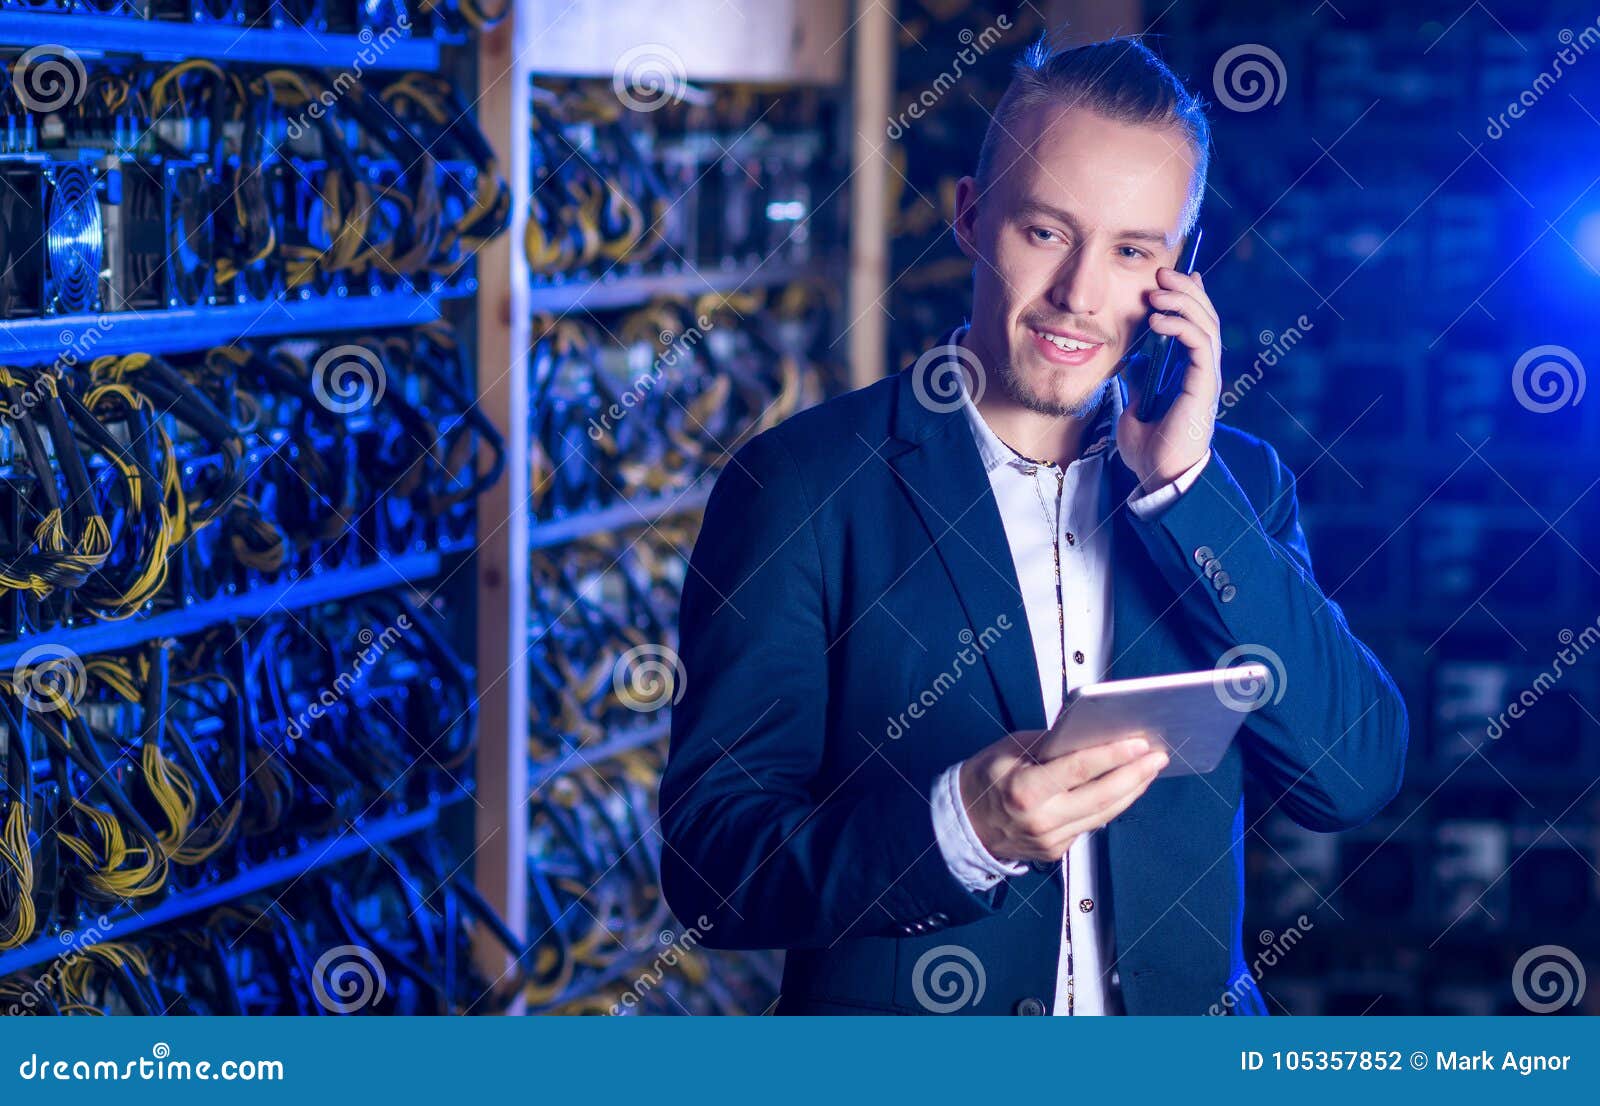 Miner Bitcoin Cryptocurrency Stock Photo - Image of ...